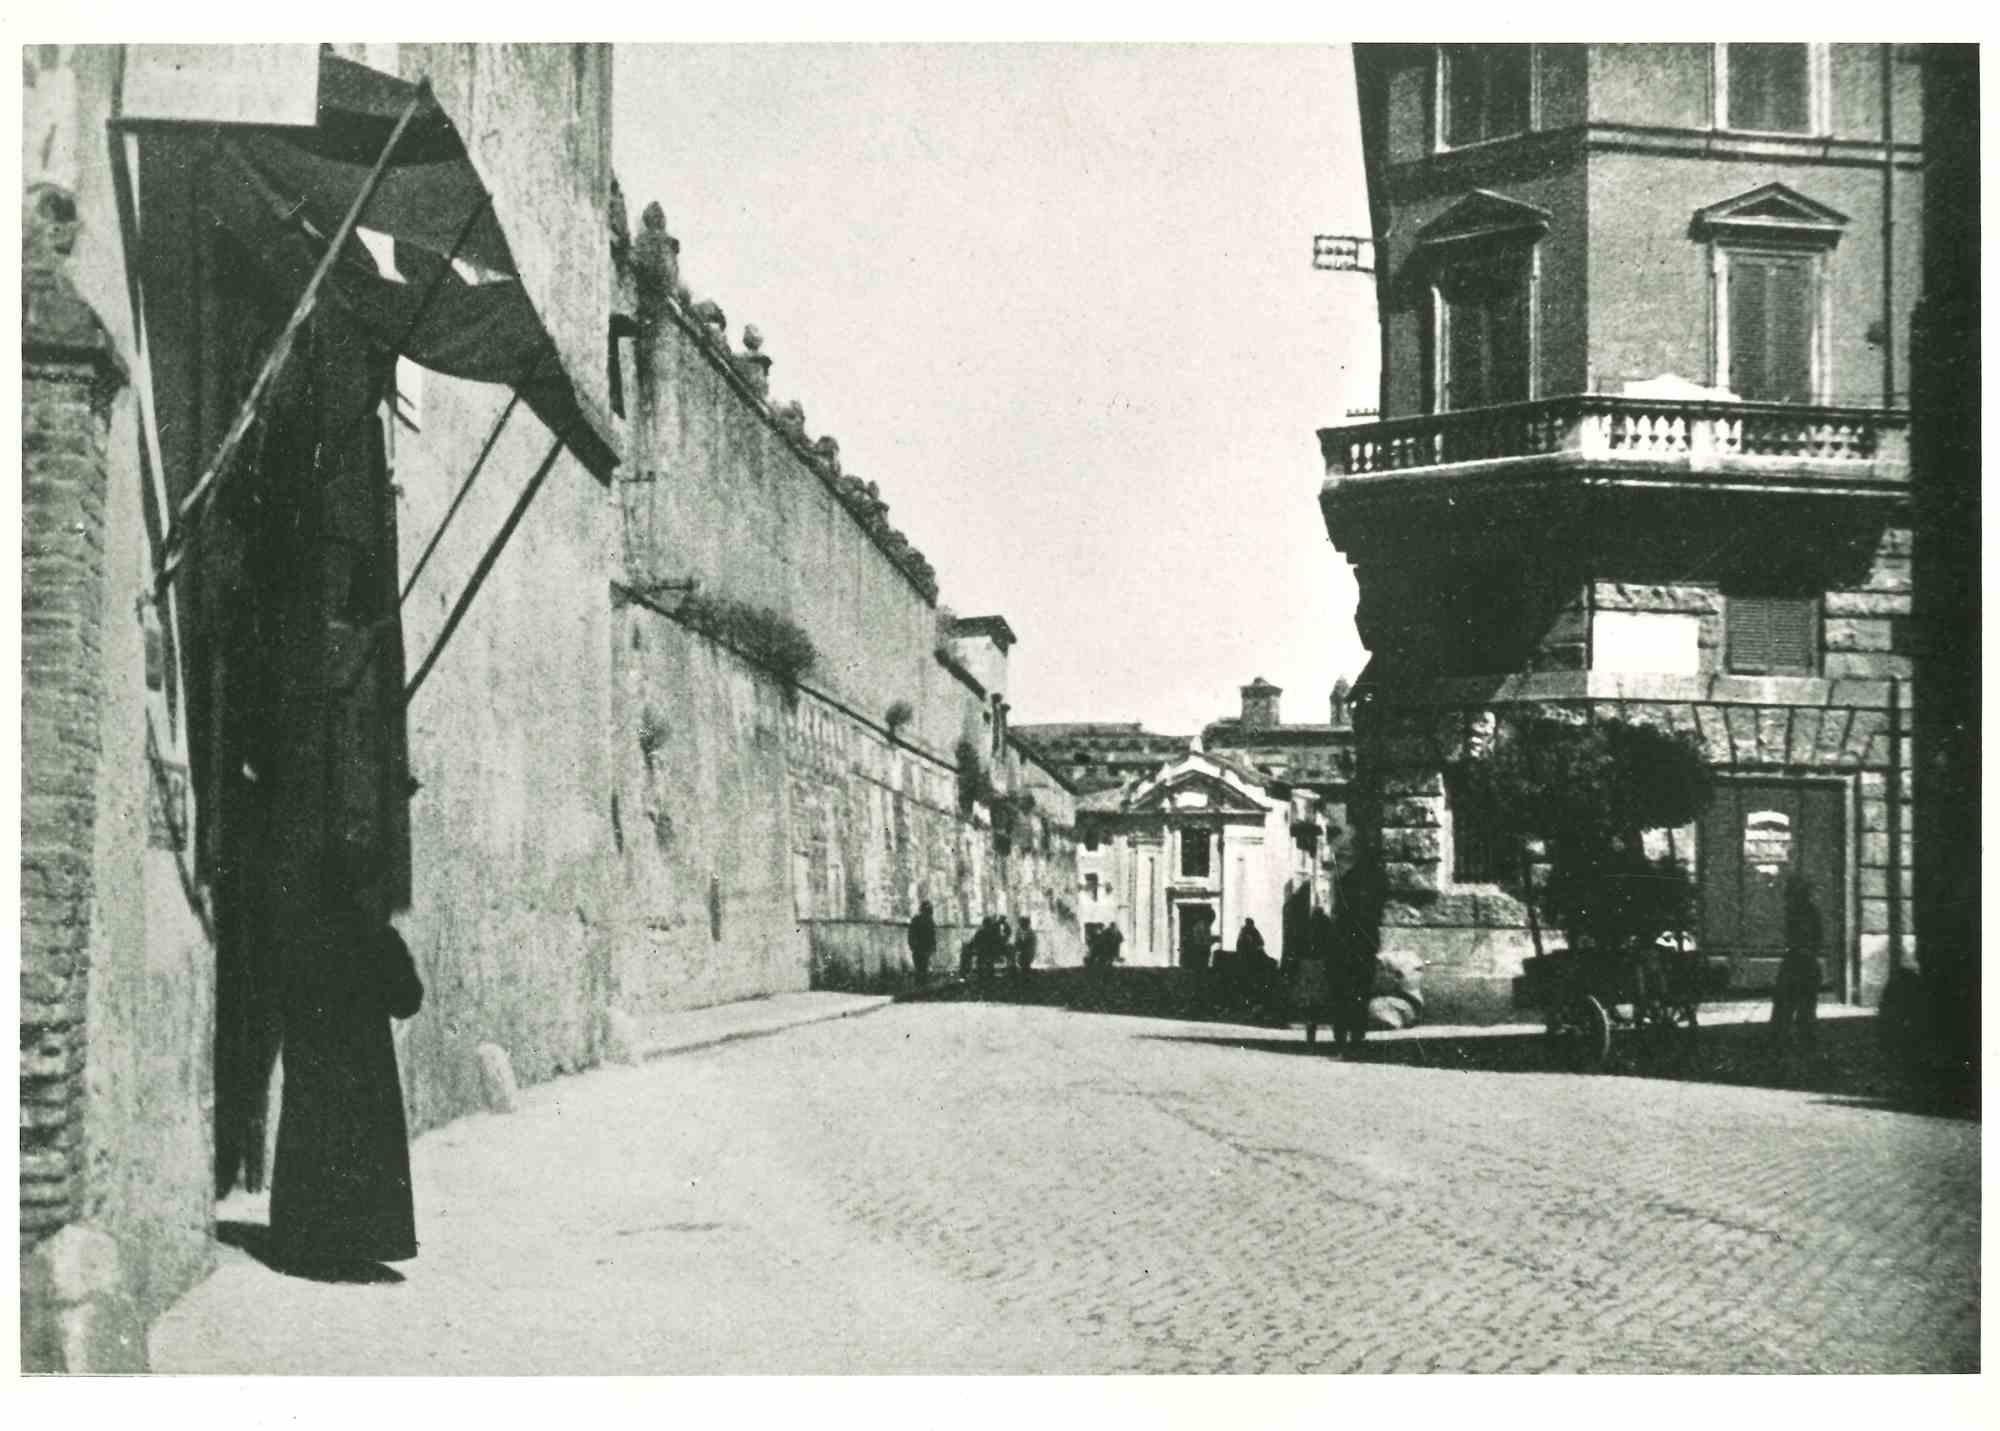 Unknown Black and White Photograph - Rome - Early 20th Century